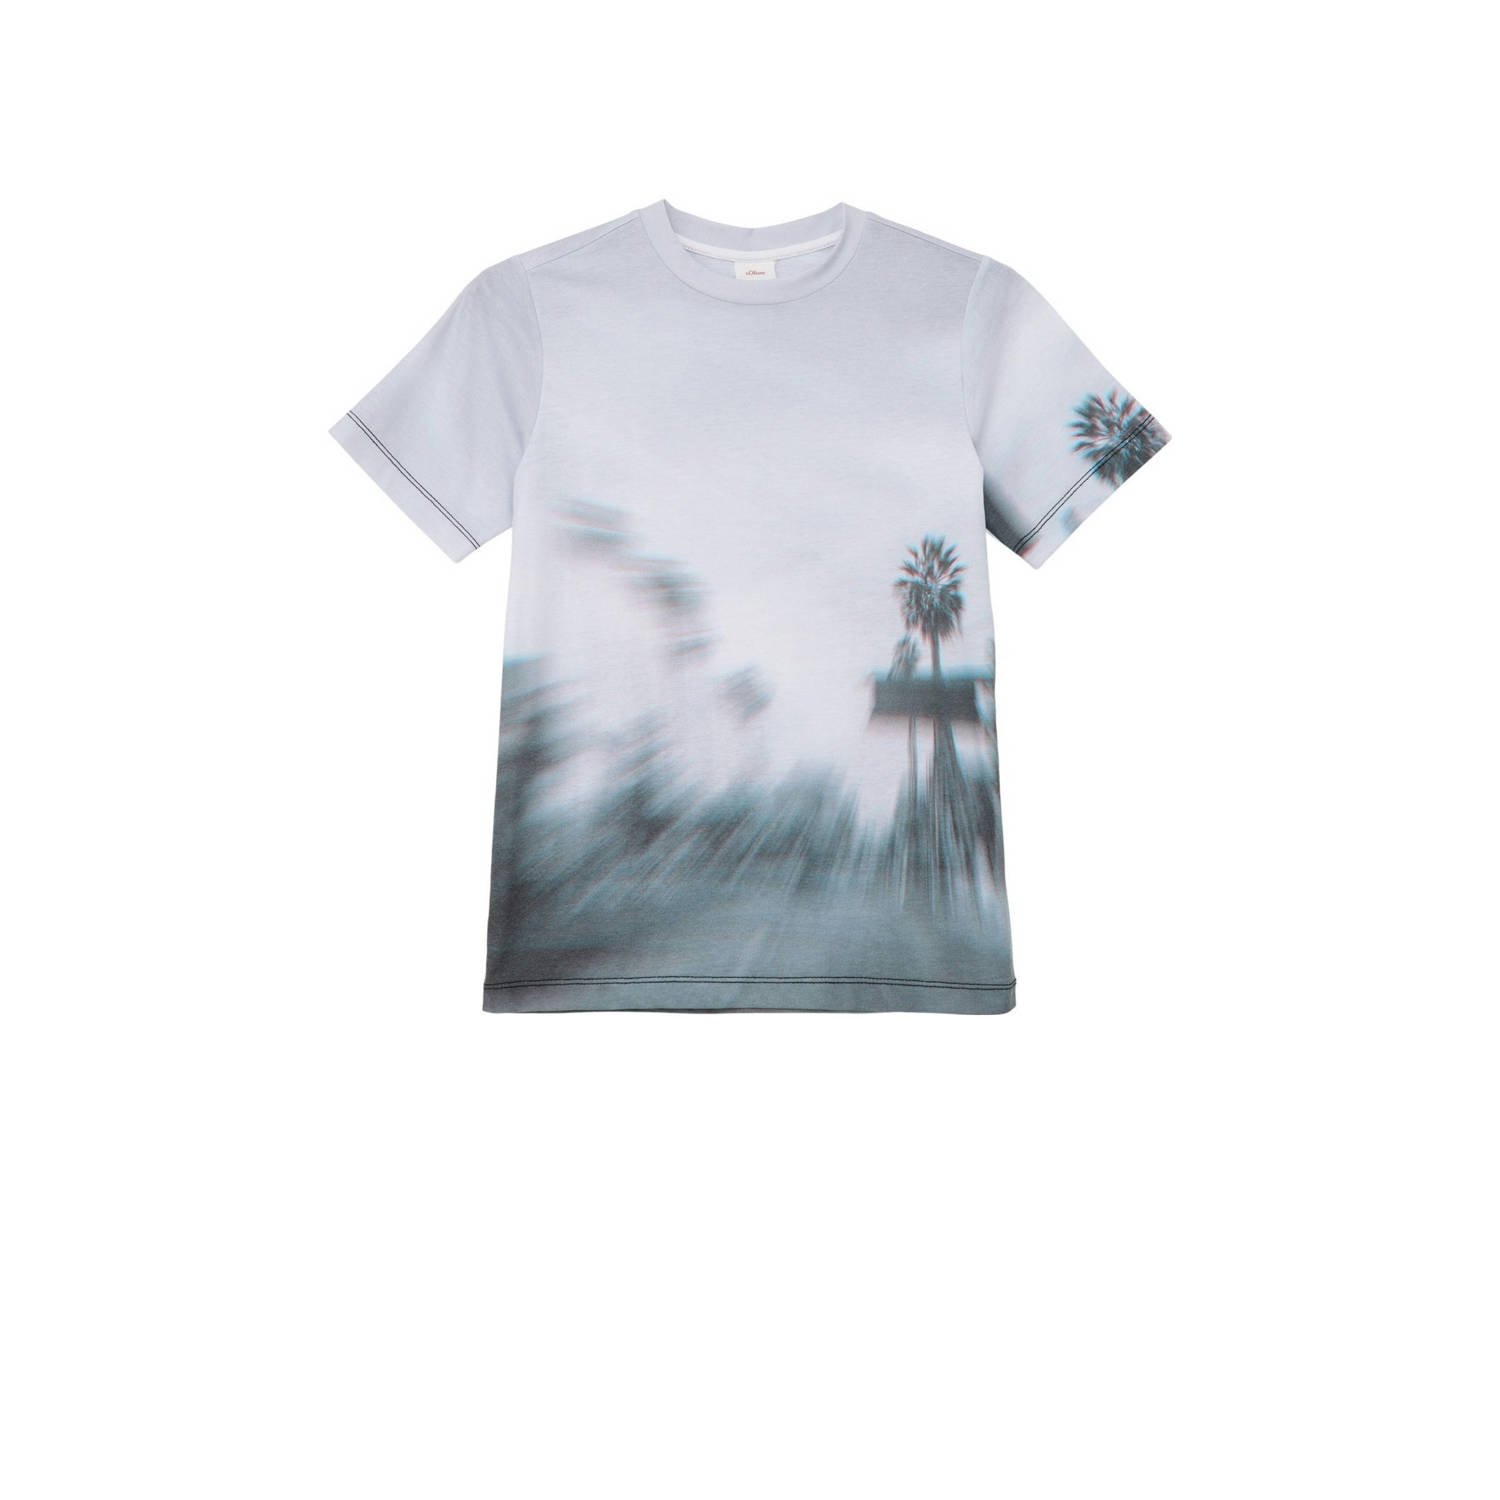 S.Oliver T-shirt met all over print wit Jongens Polyester Ronde hals All over print 140